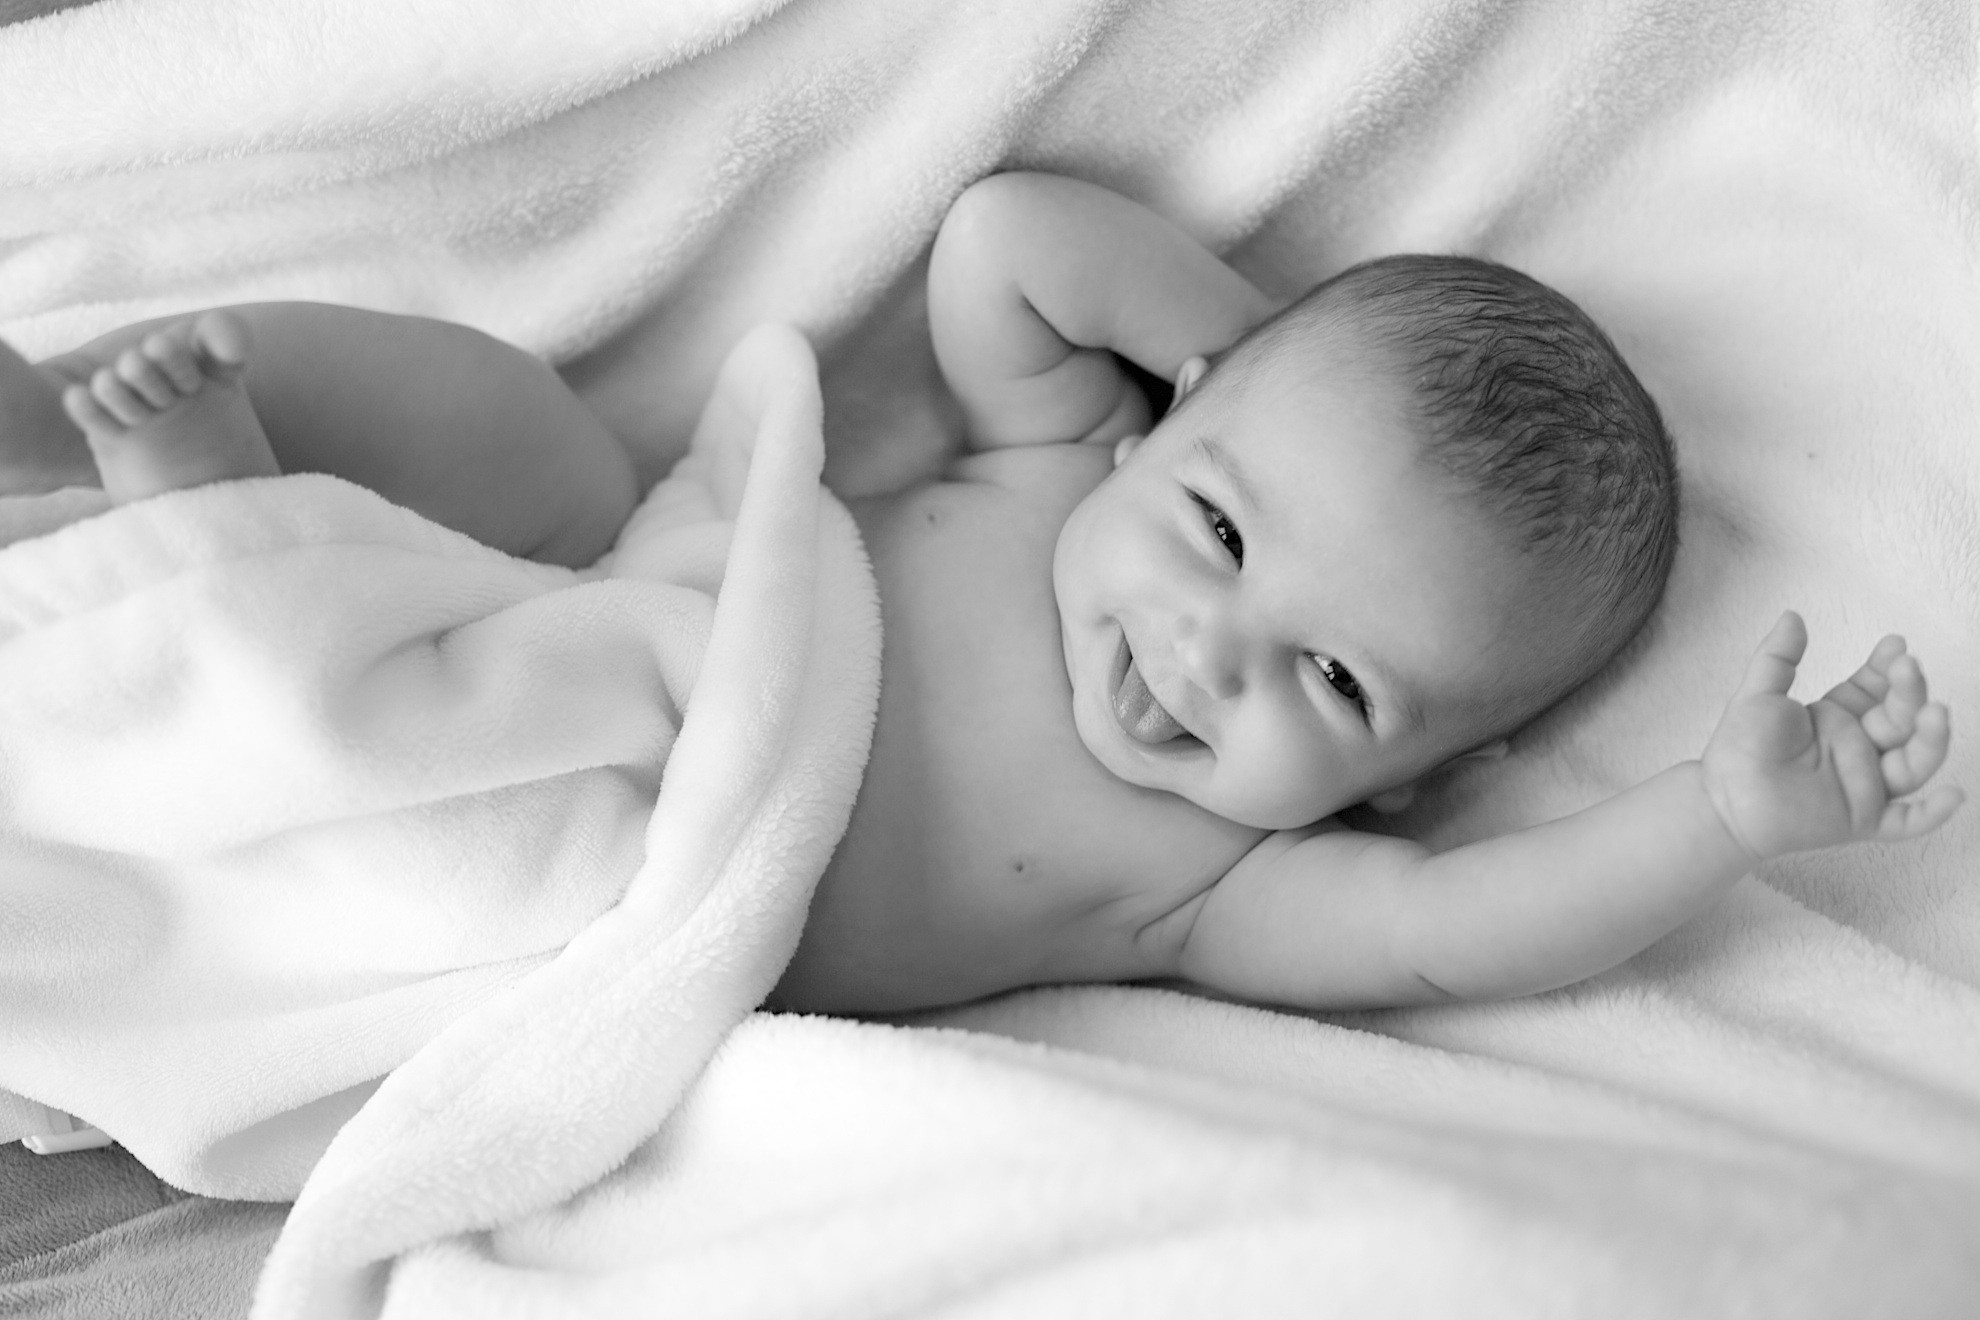 An infant laying in a blanket smiling